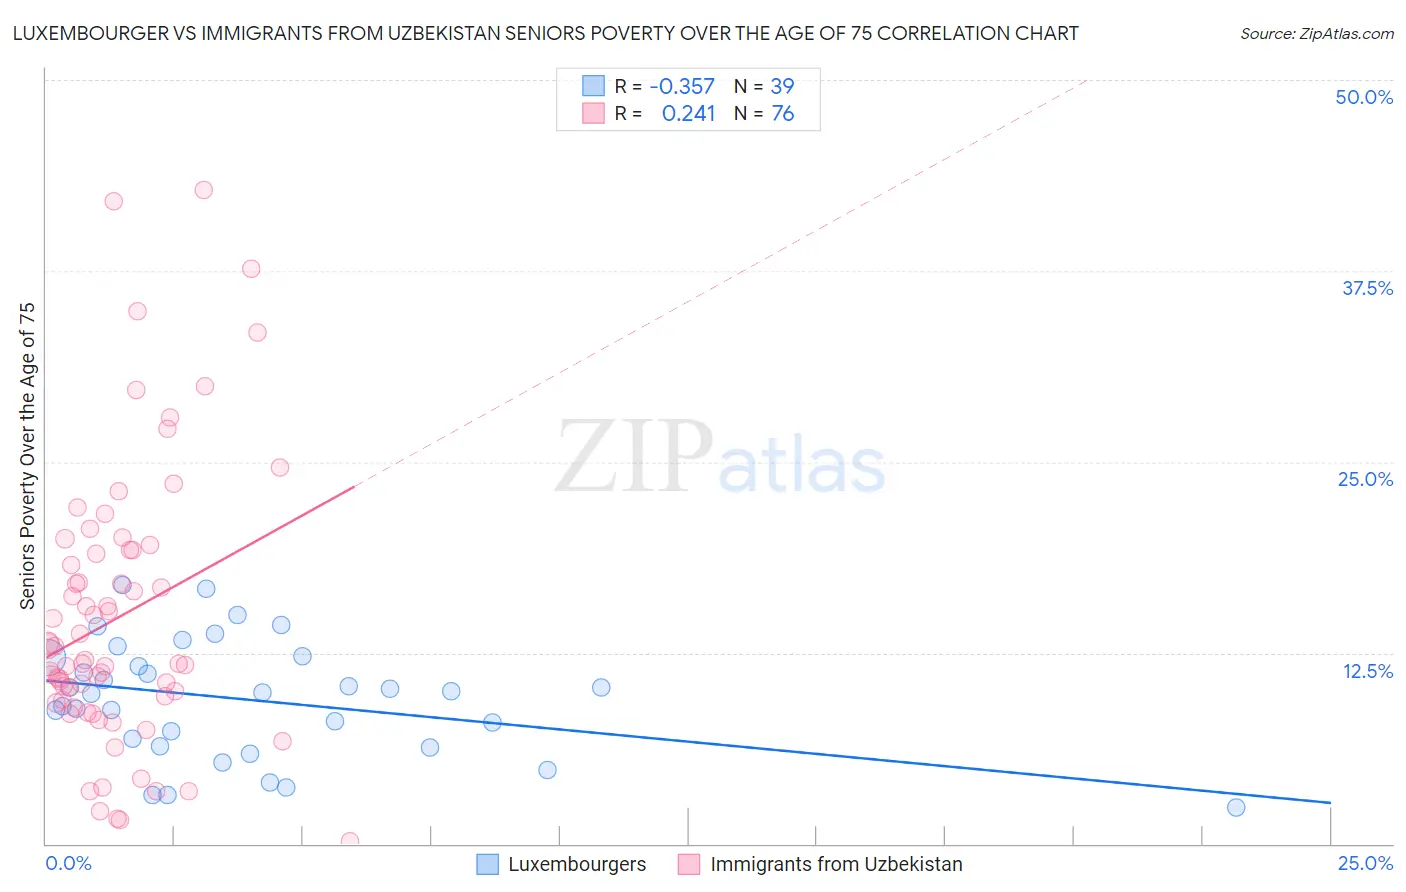 Luxembourger vs Immigrants from Uzbekistan Seniors Poverty Over the Age of 75